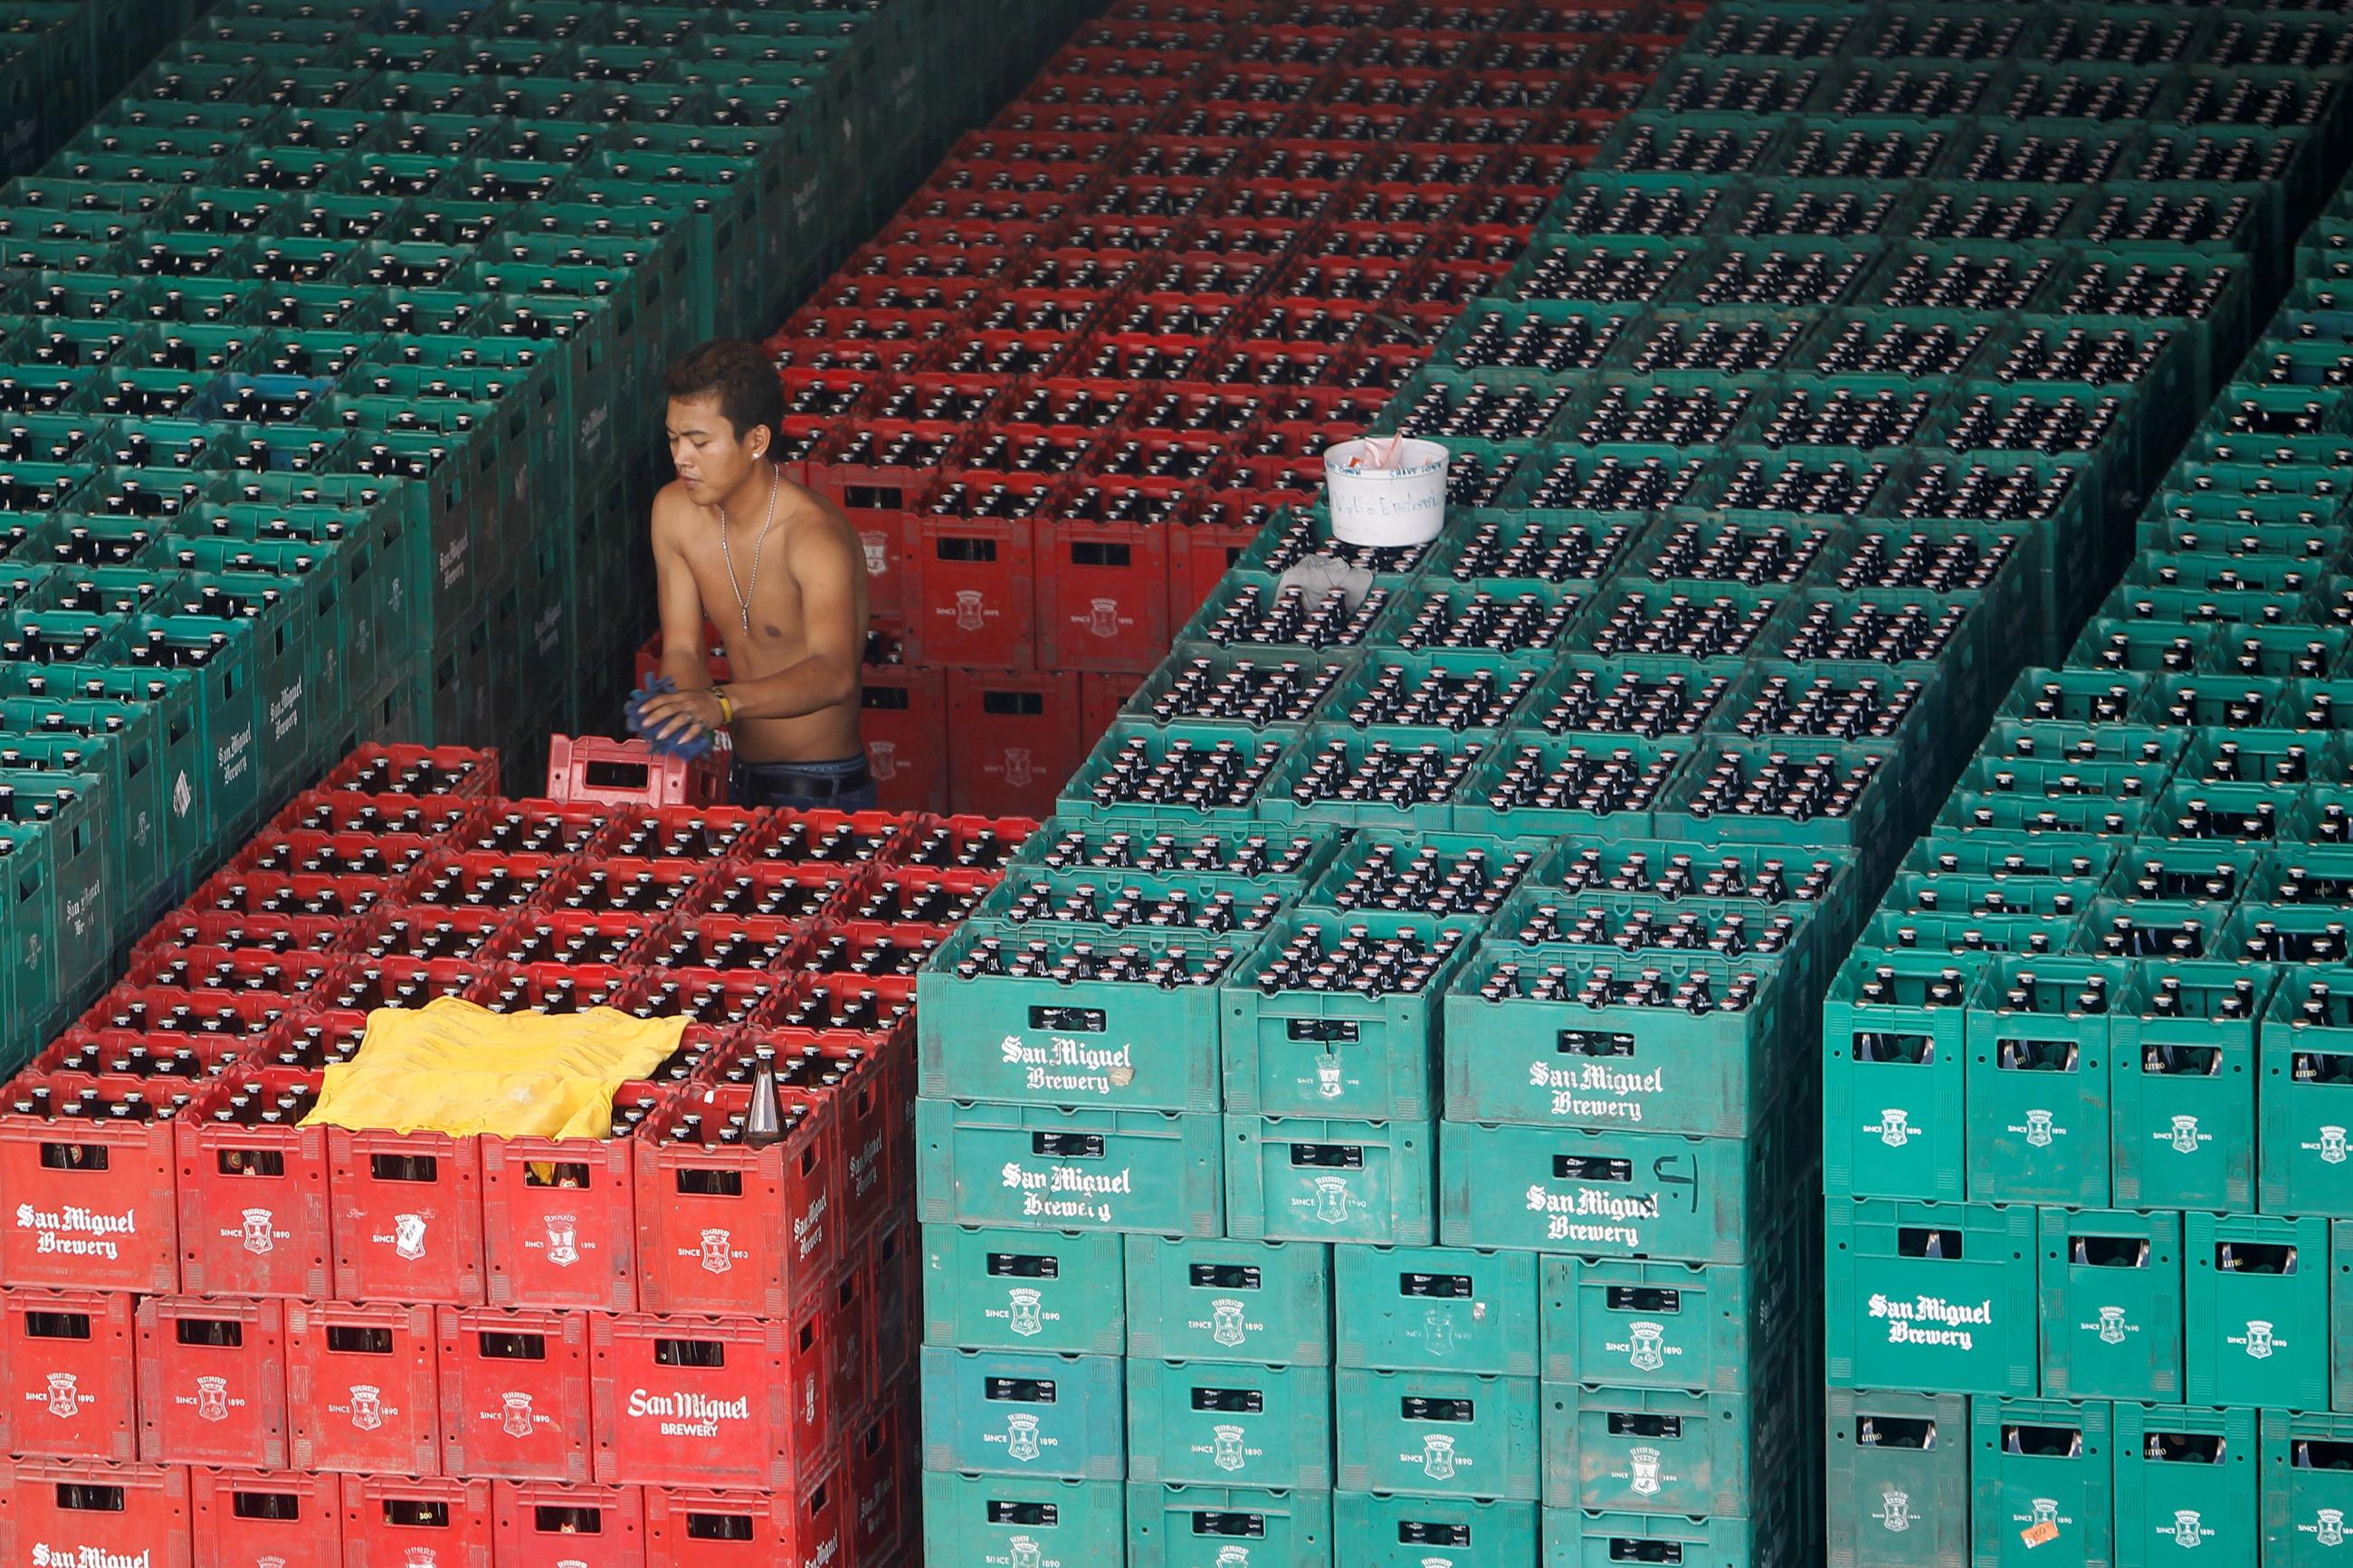 A worker arranges crates of beer before loading them onto a truck inside a San Miguel beer warehouse in Manila, November 14, 2012.